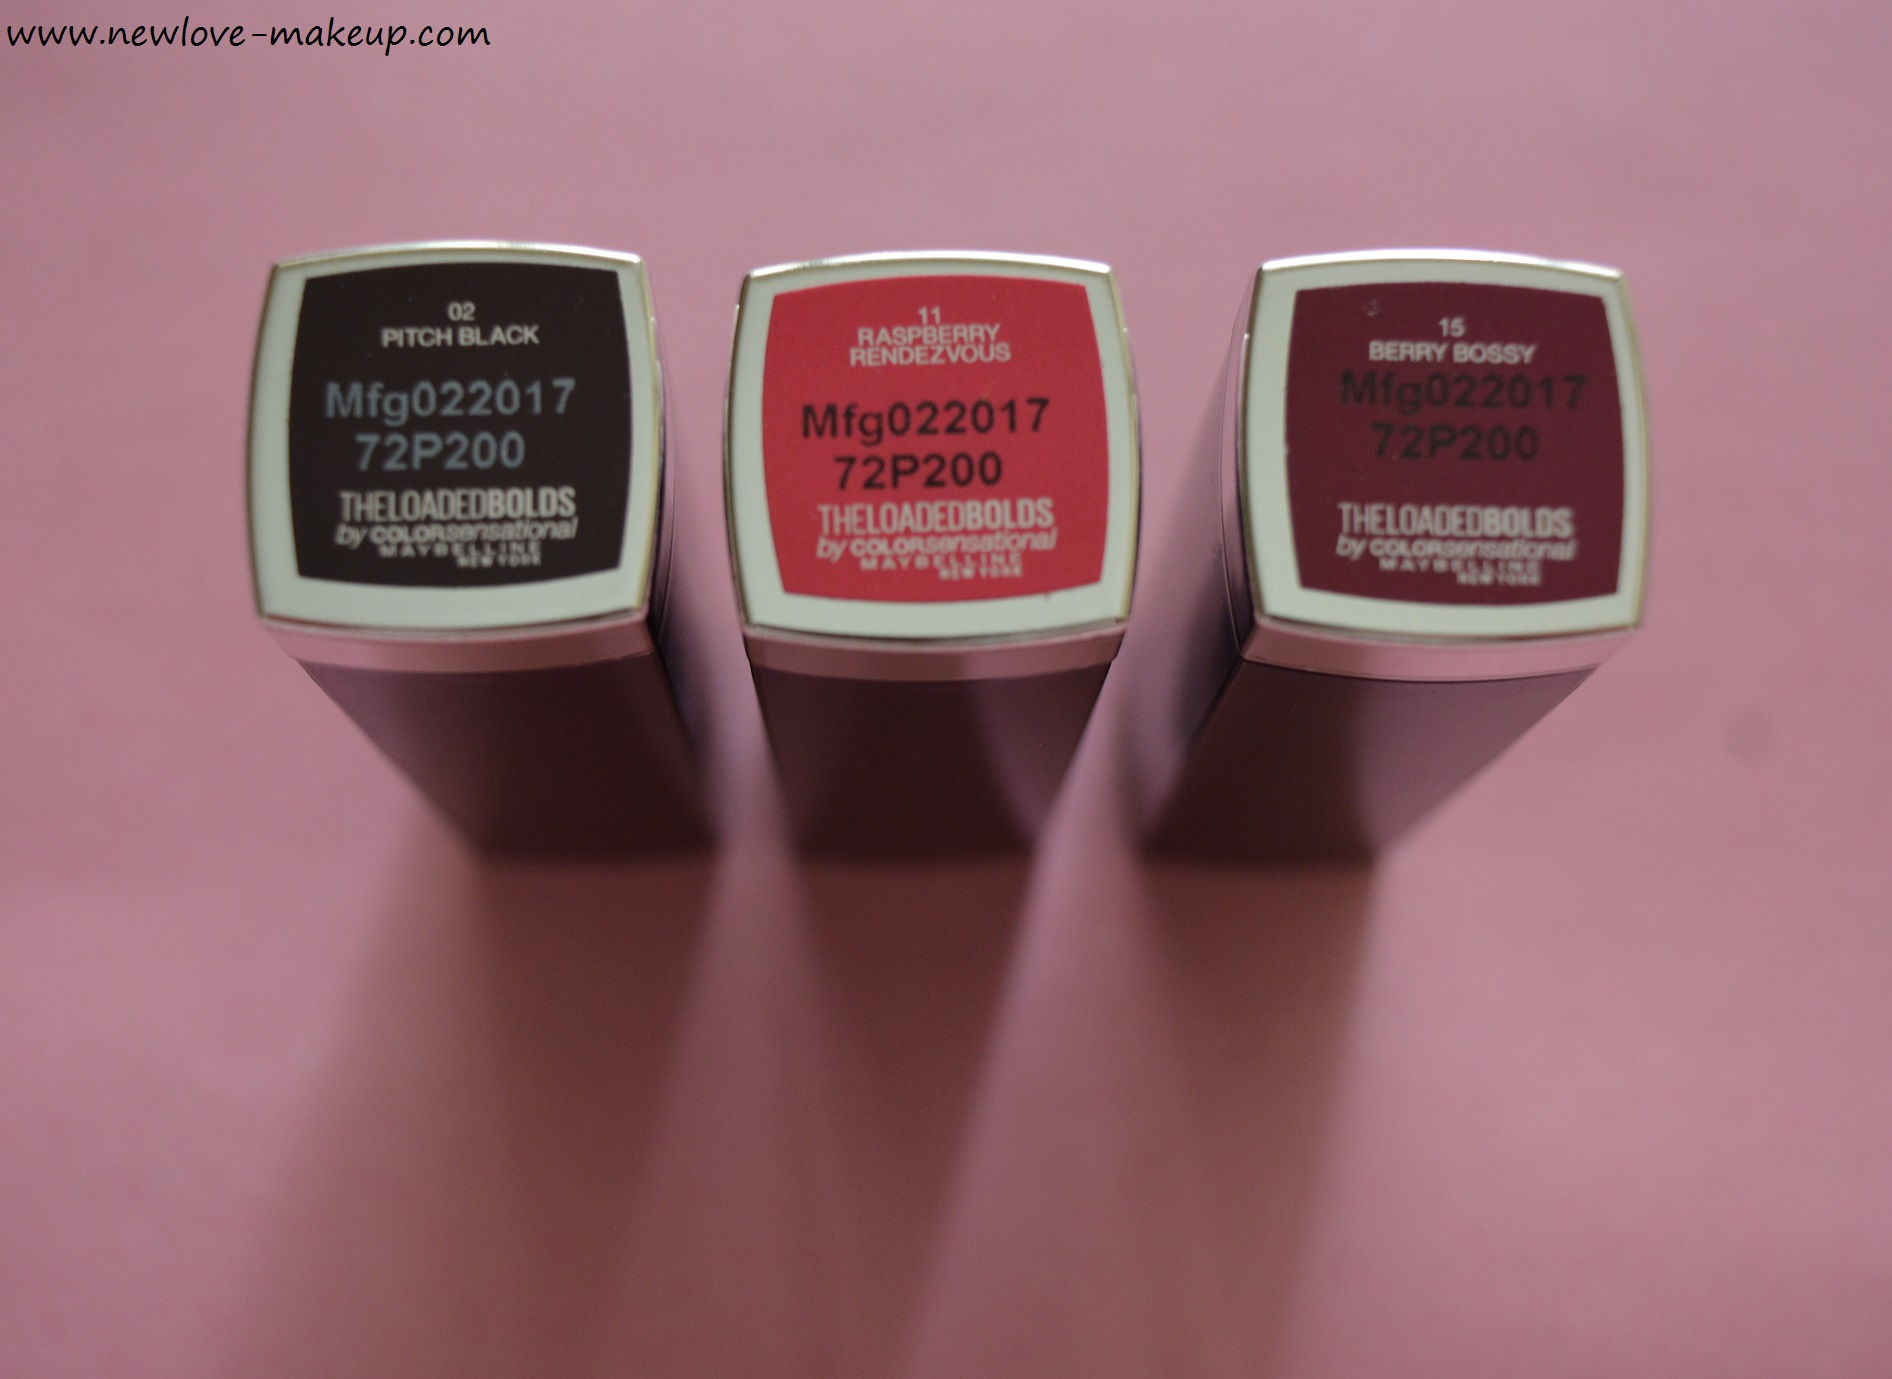 Maybelline The Loaded Bolds Lipsticks Review, Swatches